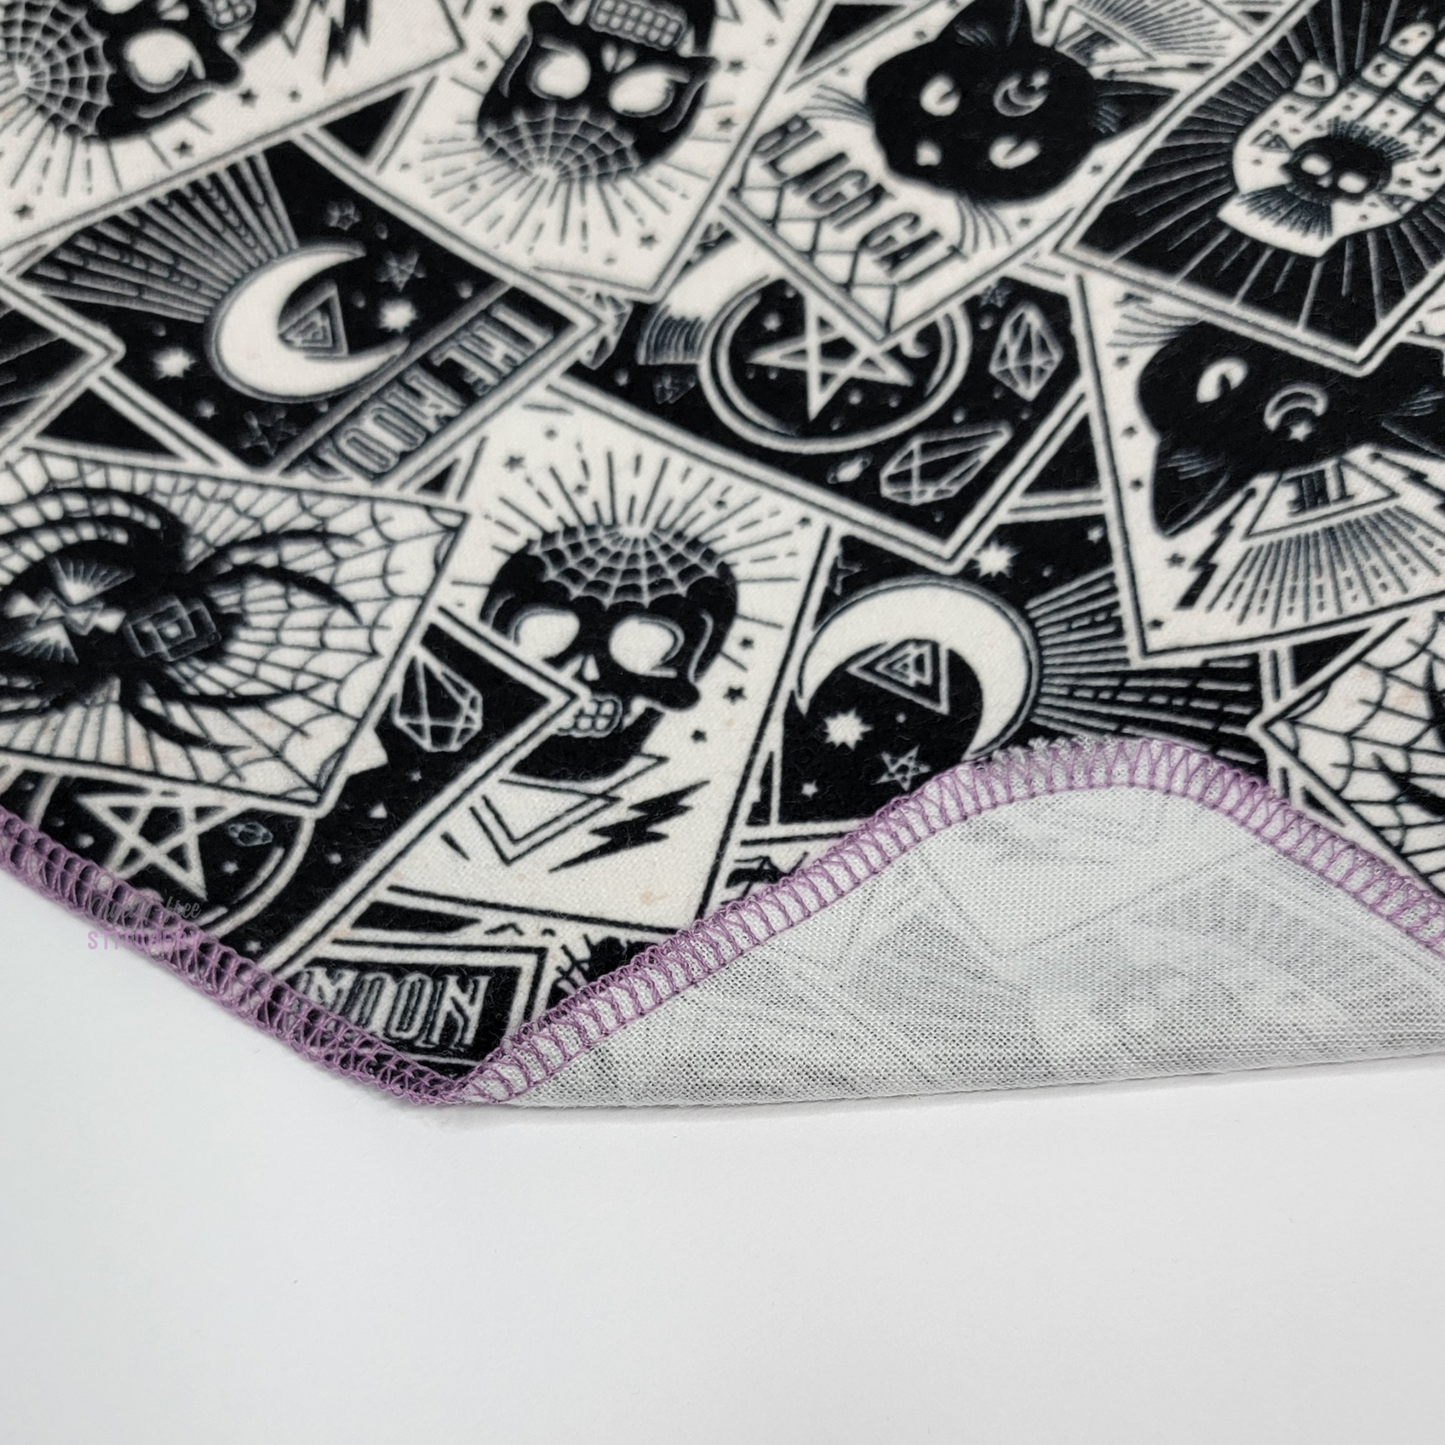 A NonPaper Towel that is white with scattered Tarot cards printed in black, showing various spiders, skulls, and cats. The corner is folded up to show the purple stitching and that the opposite side is white.